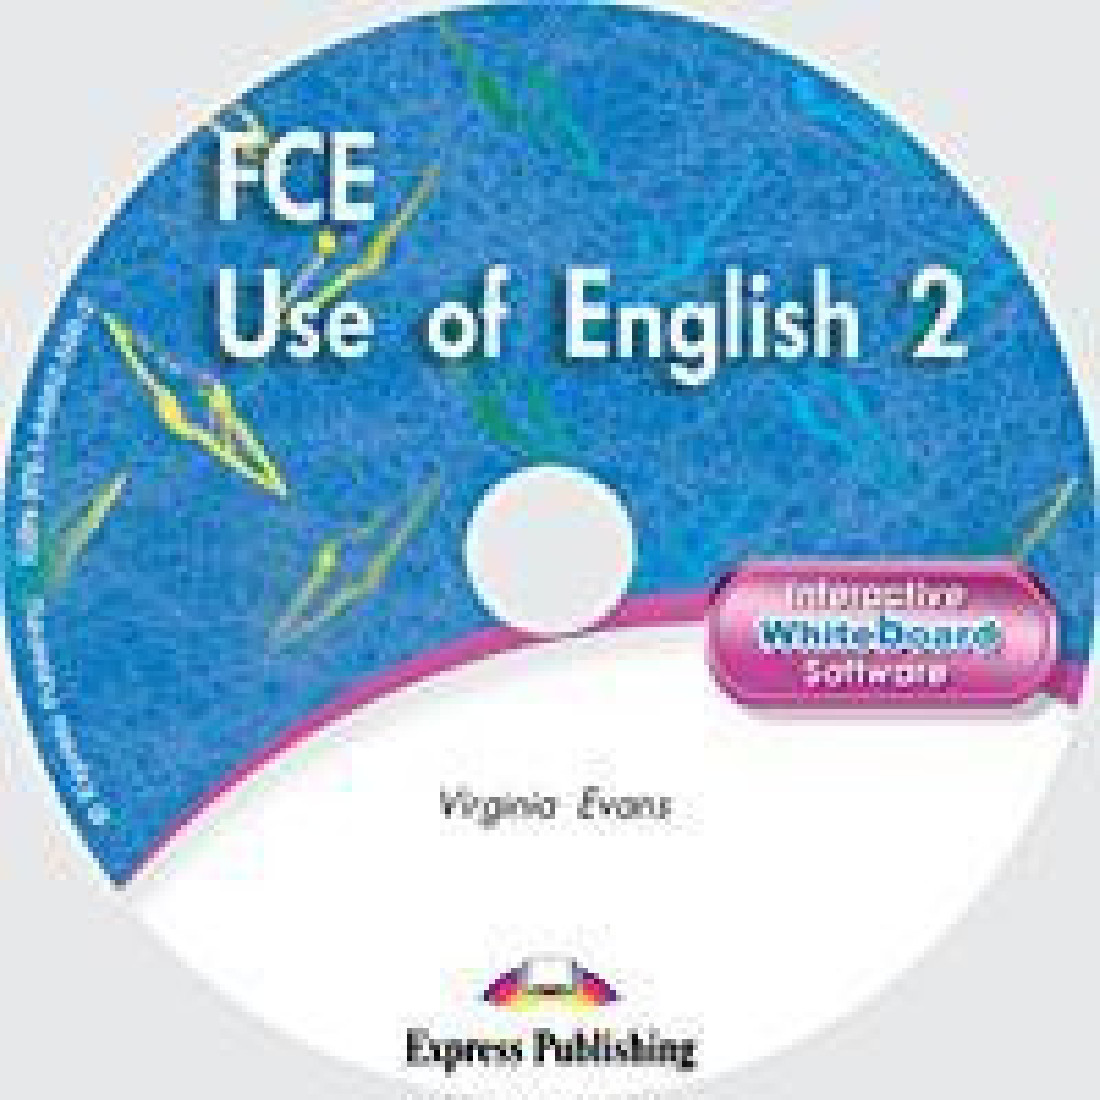 FCE USE OF ENGLISH 2 INTERACTIVE WHITEBOARD SOFTWARE